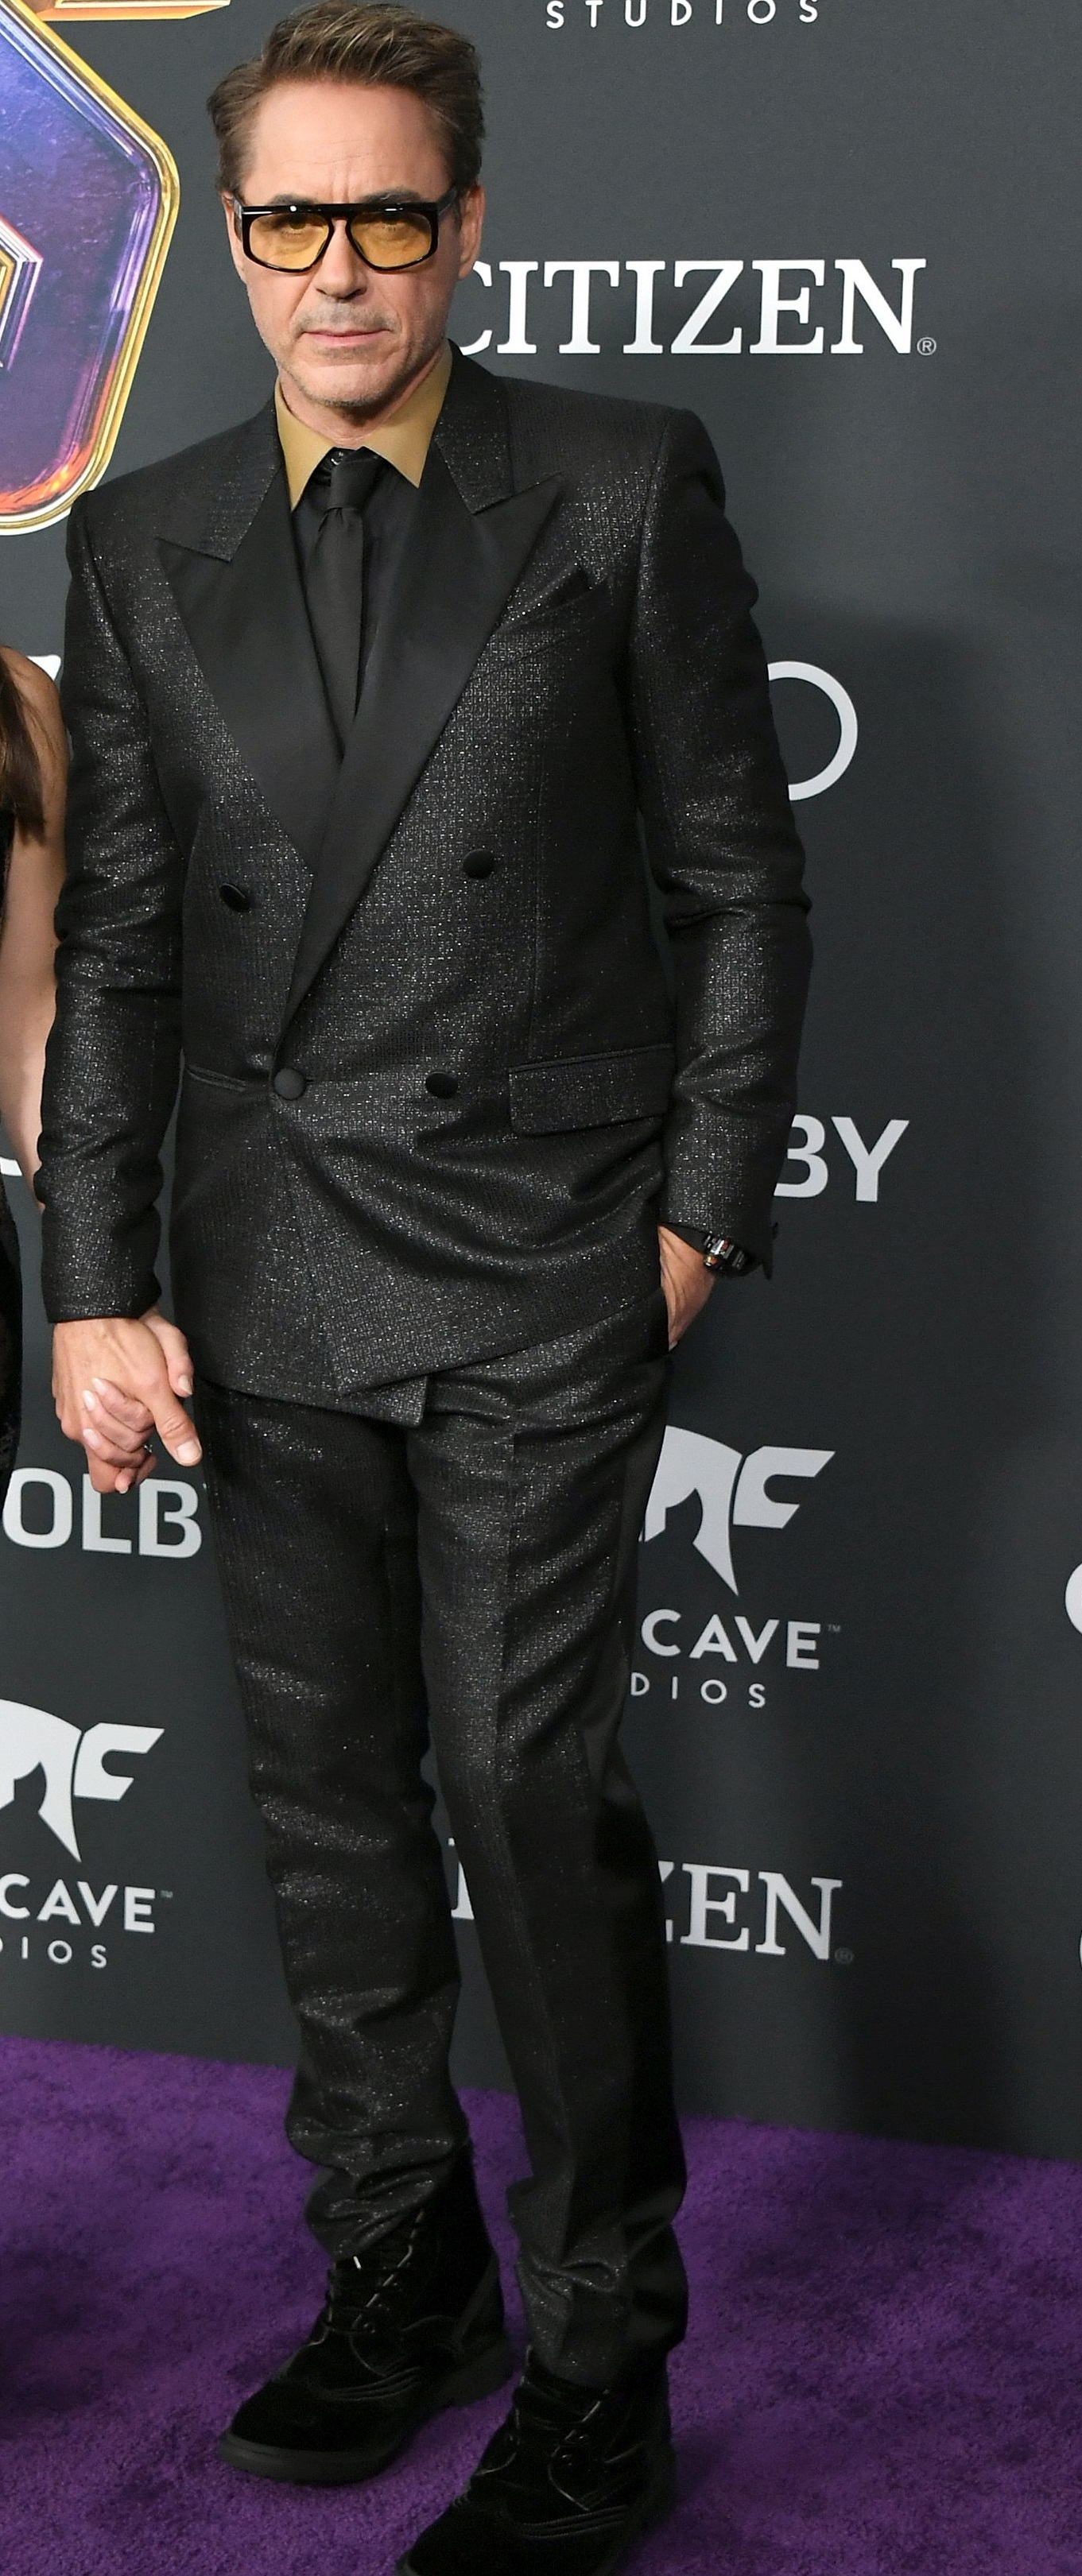 Robert Downey Jr. in Givenchy (1)